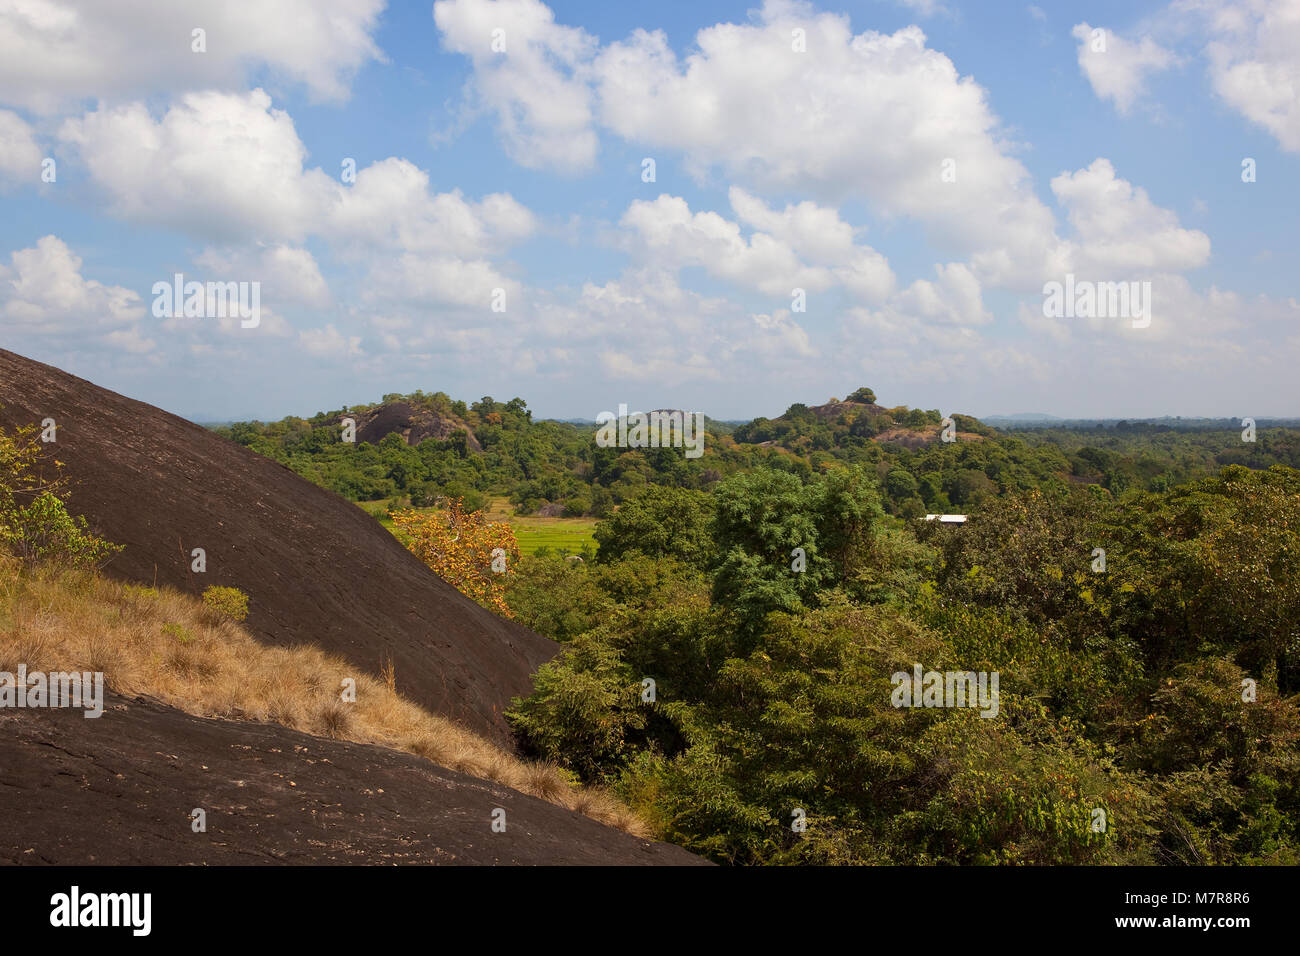 volcanic rock formation at wasgamuwa national park in sri lanka under a blue sky with fluffy white clouds Stock Photo